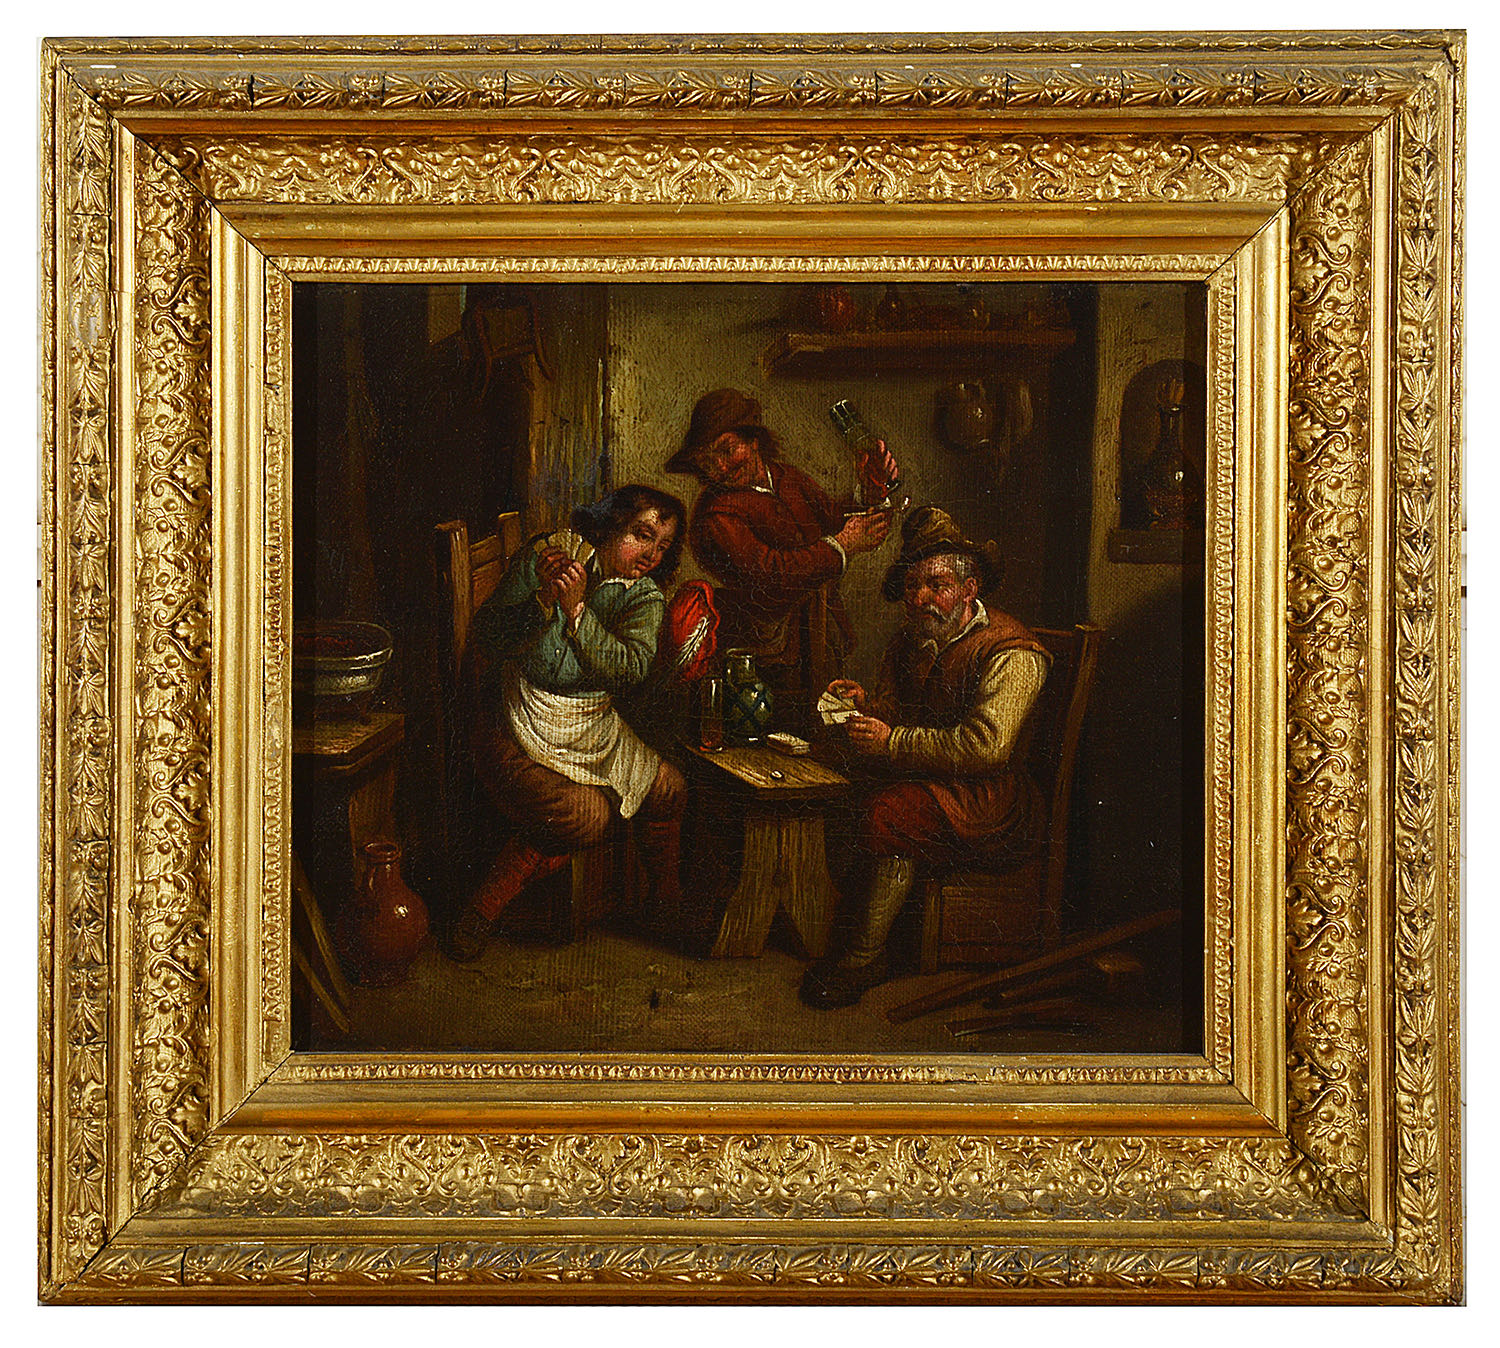 Three late 18th / early 19th c Dutch school tavern genre scenes in the manner of Jan Steen - Image 3 of 3